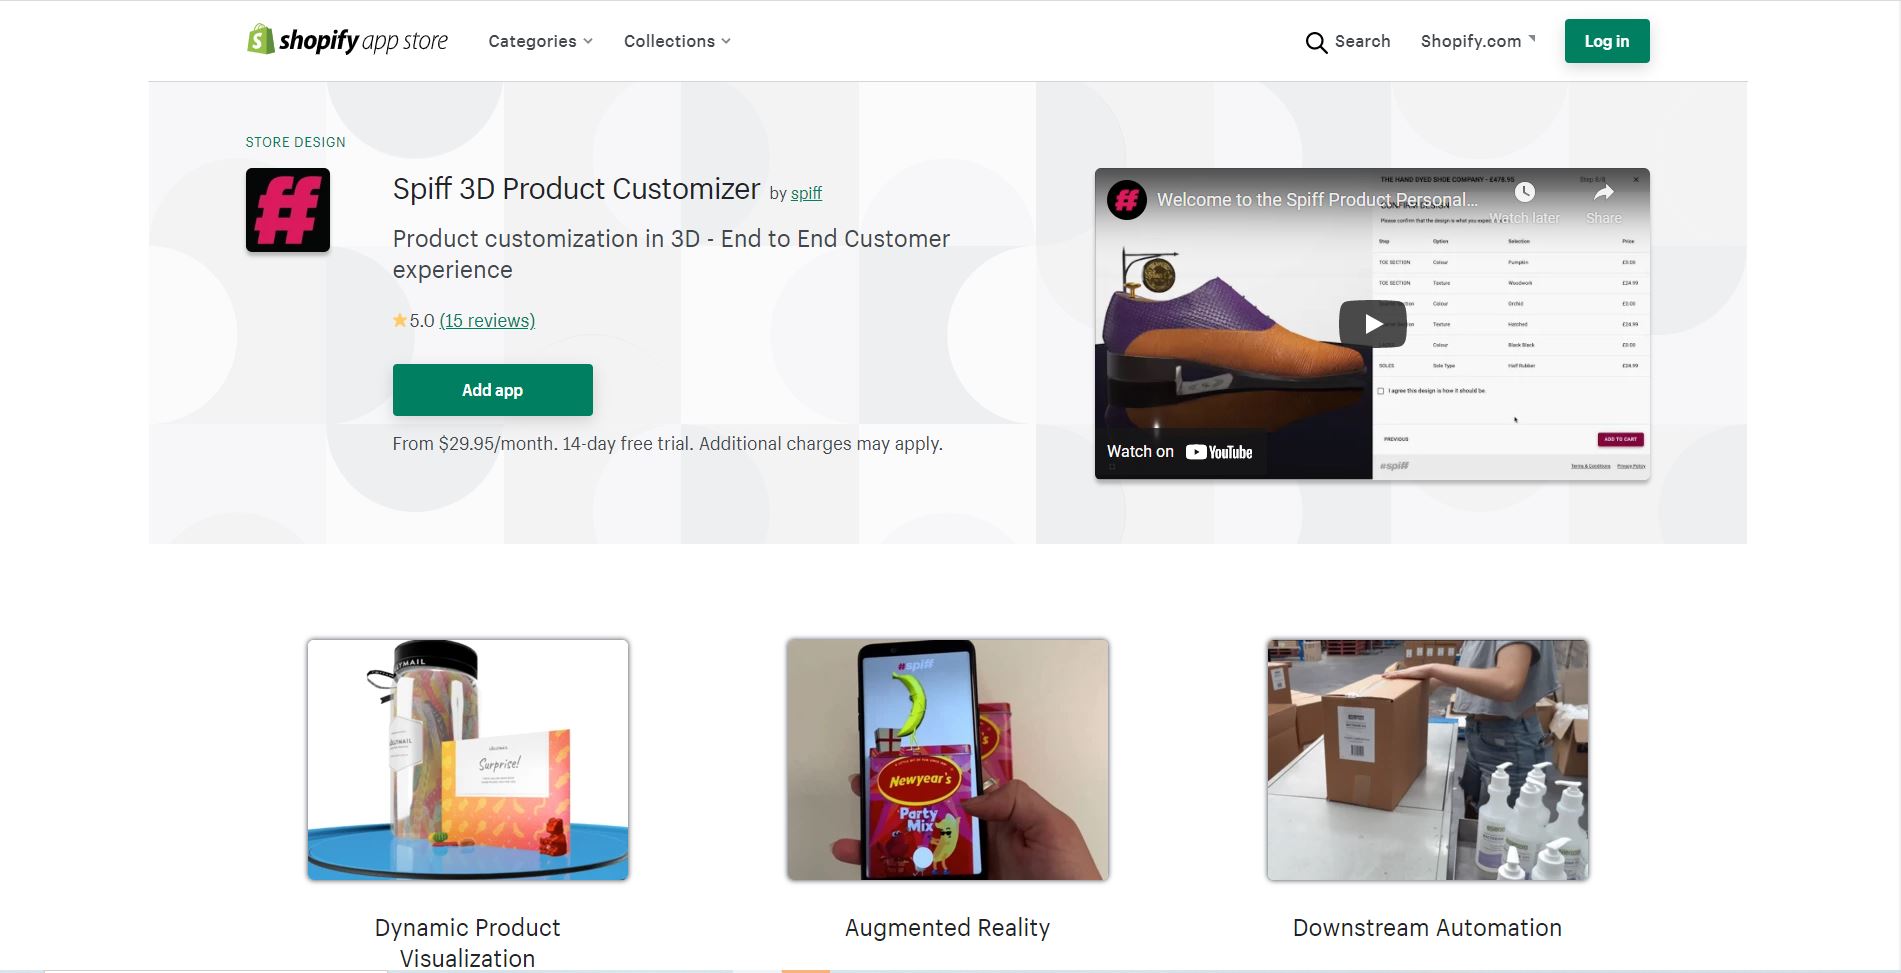 Shopify 360 Product Viewer